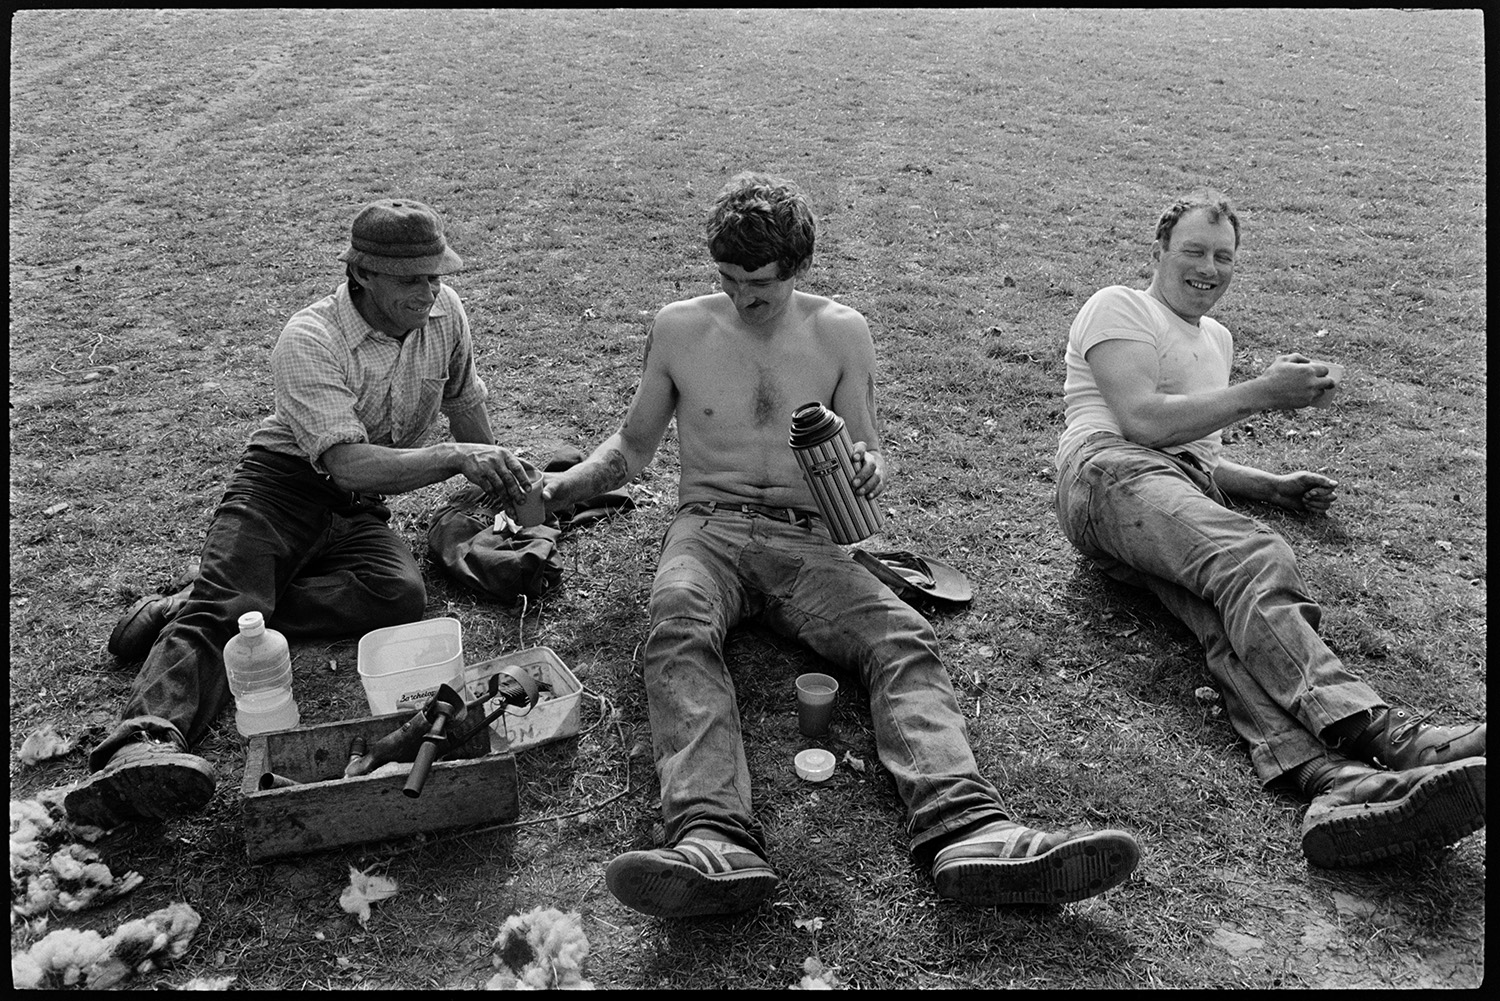 Sheepshearers tea break in field. 
[Three men having a break from sheep shearing in a field at Brendon Barton. They are sat on the grass and are pouring drinks from a thermos flask.]